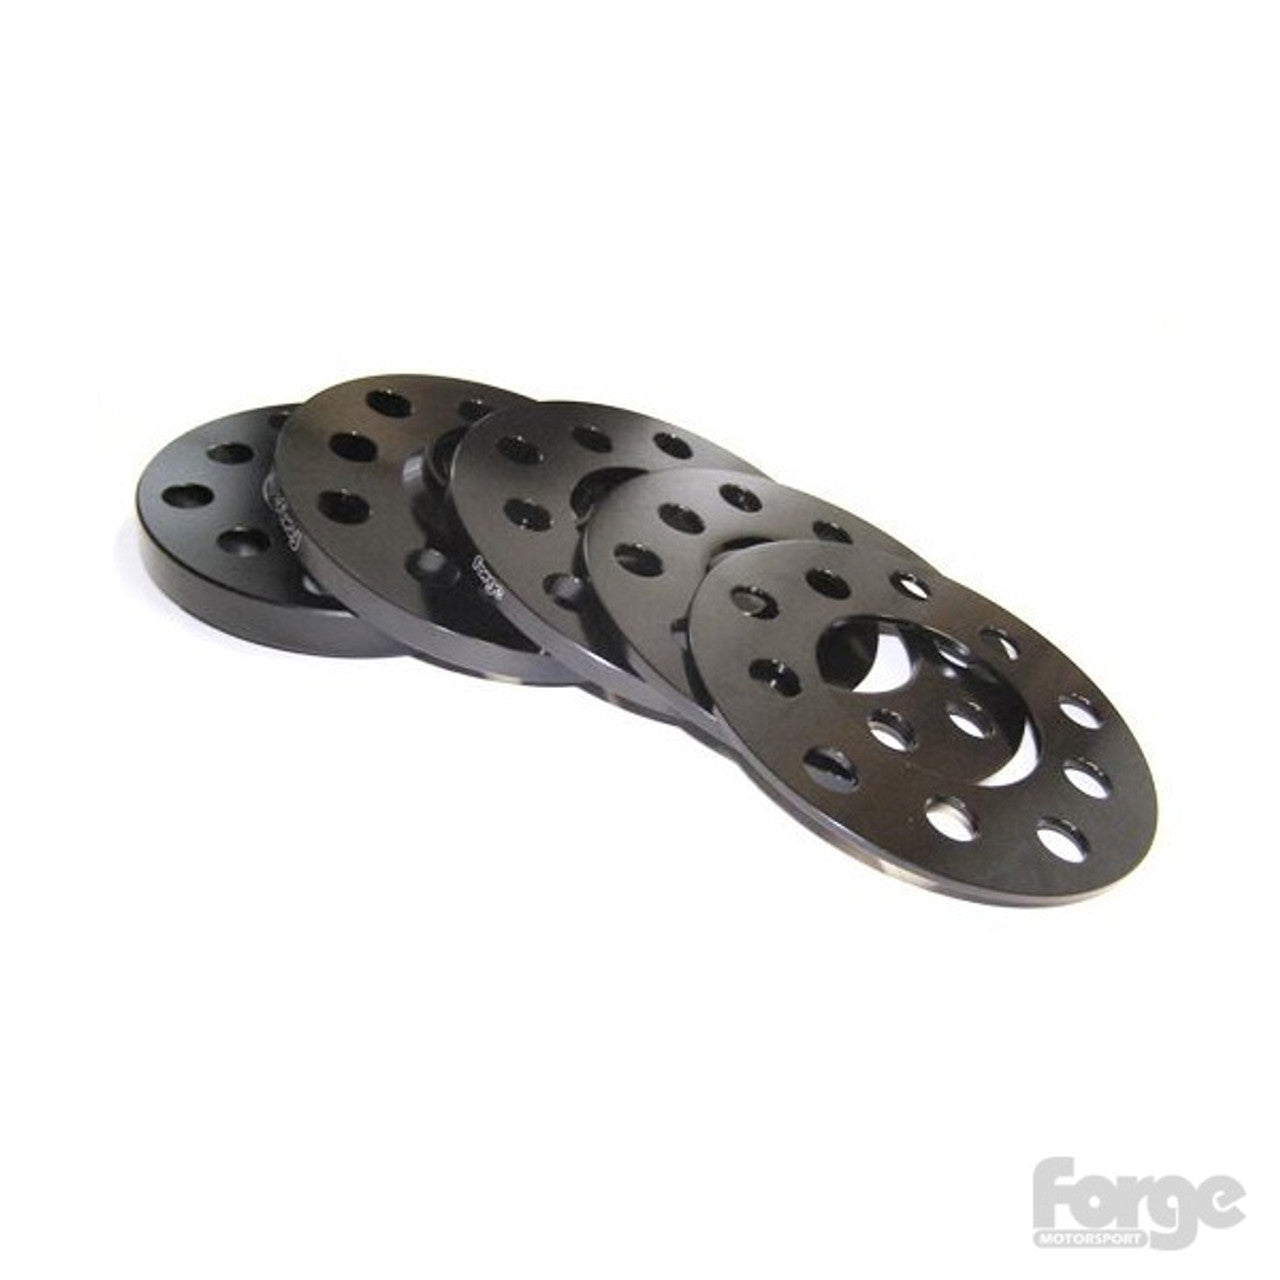 Forge 3mm (per side) flat spacers 